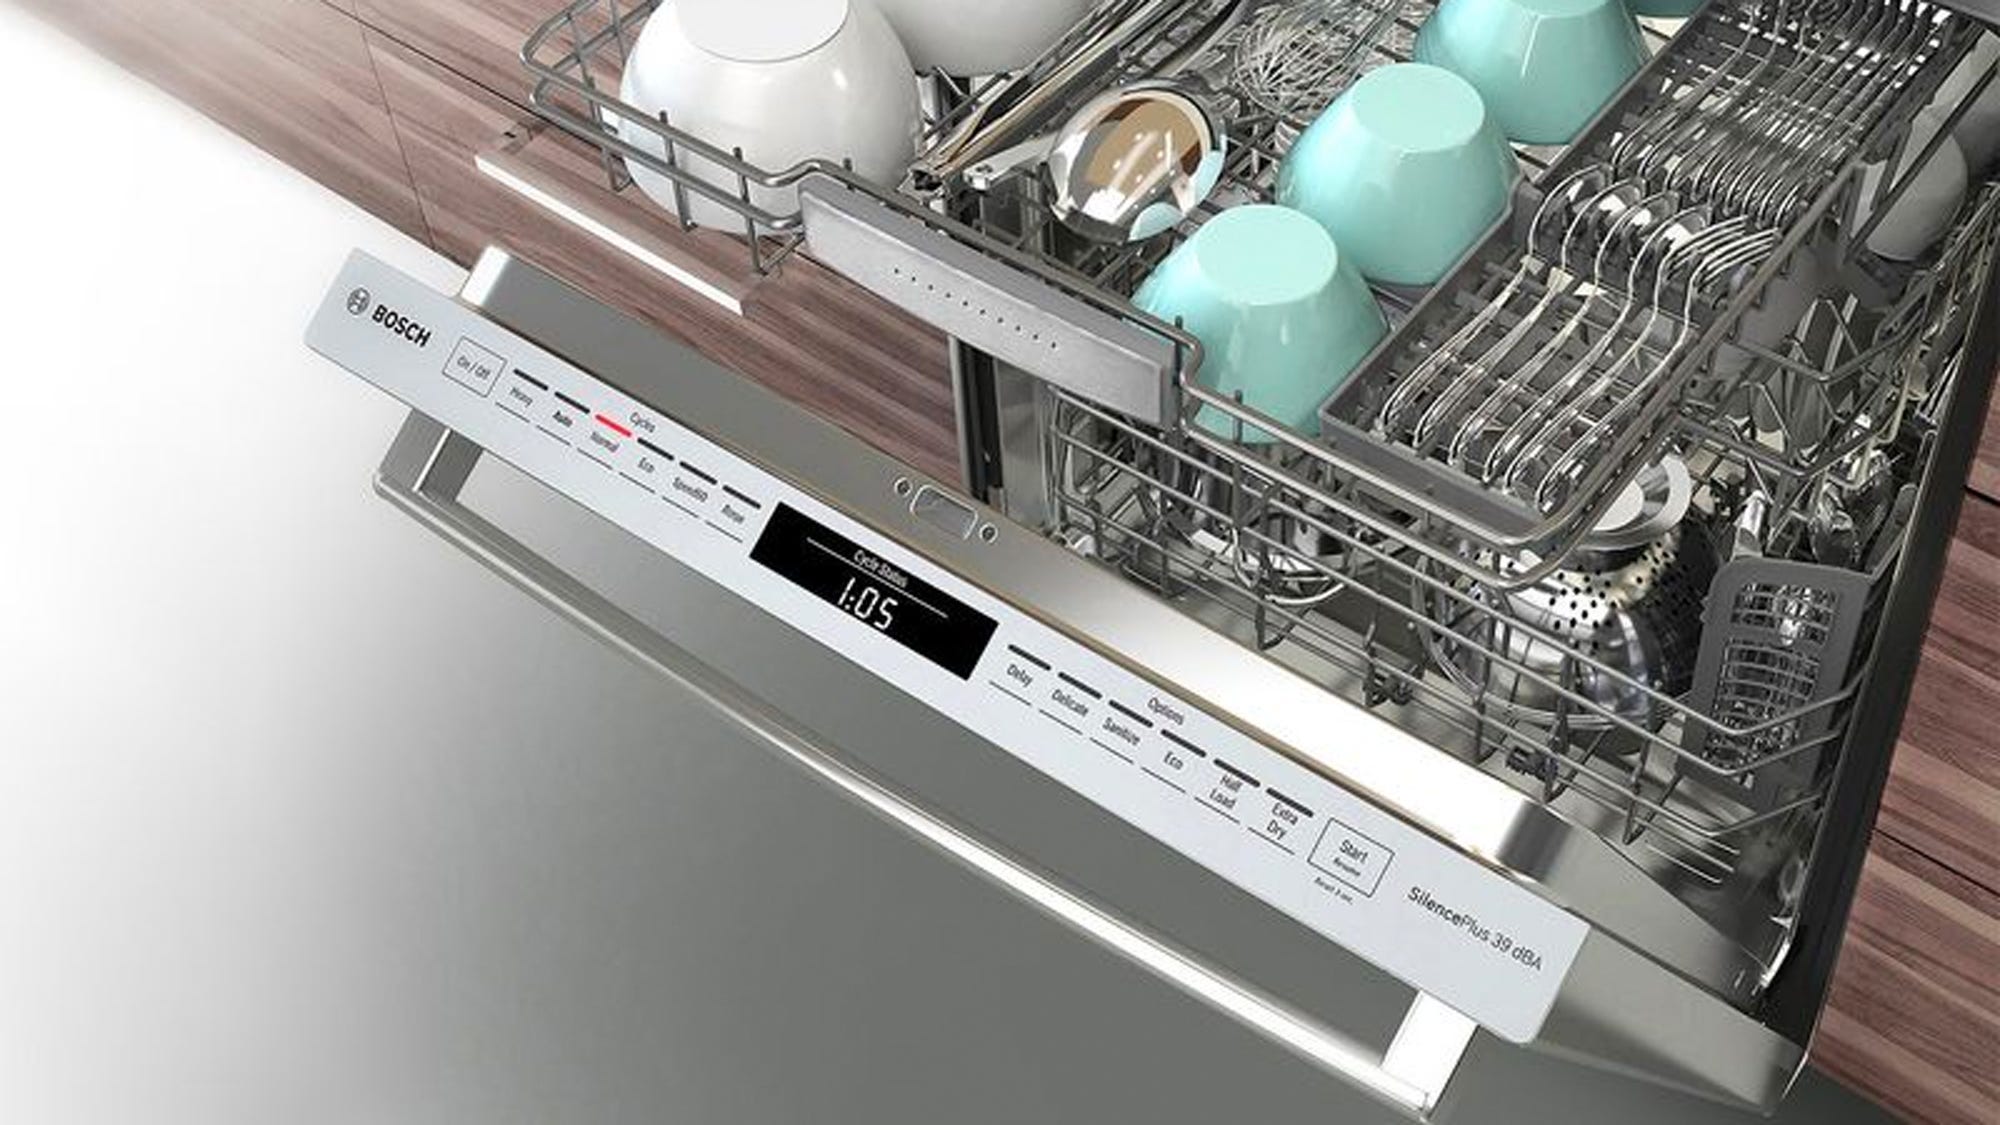 ratings for dishwashers 2018